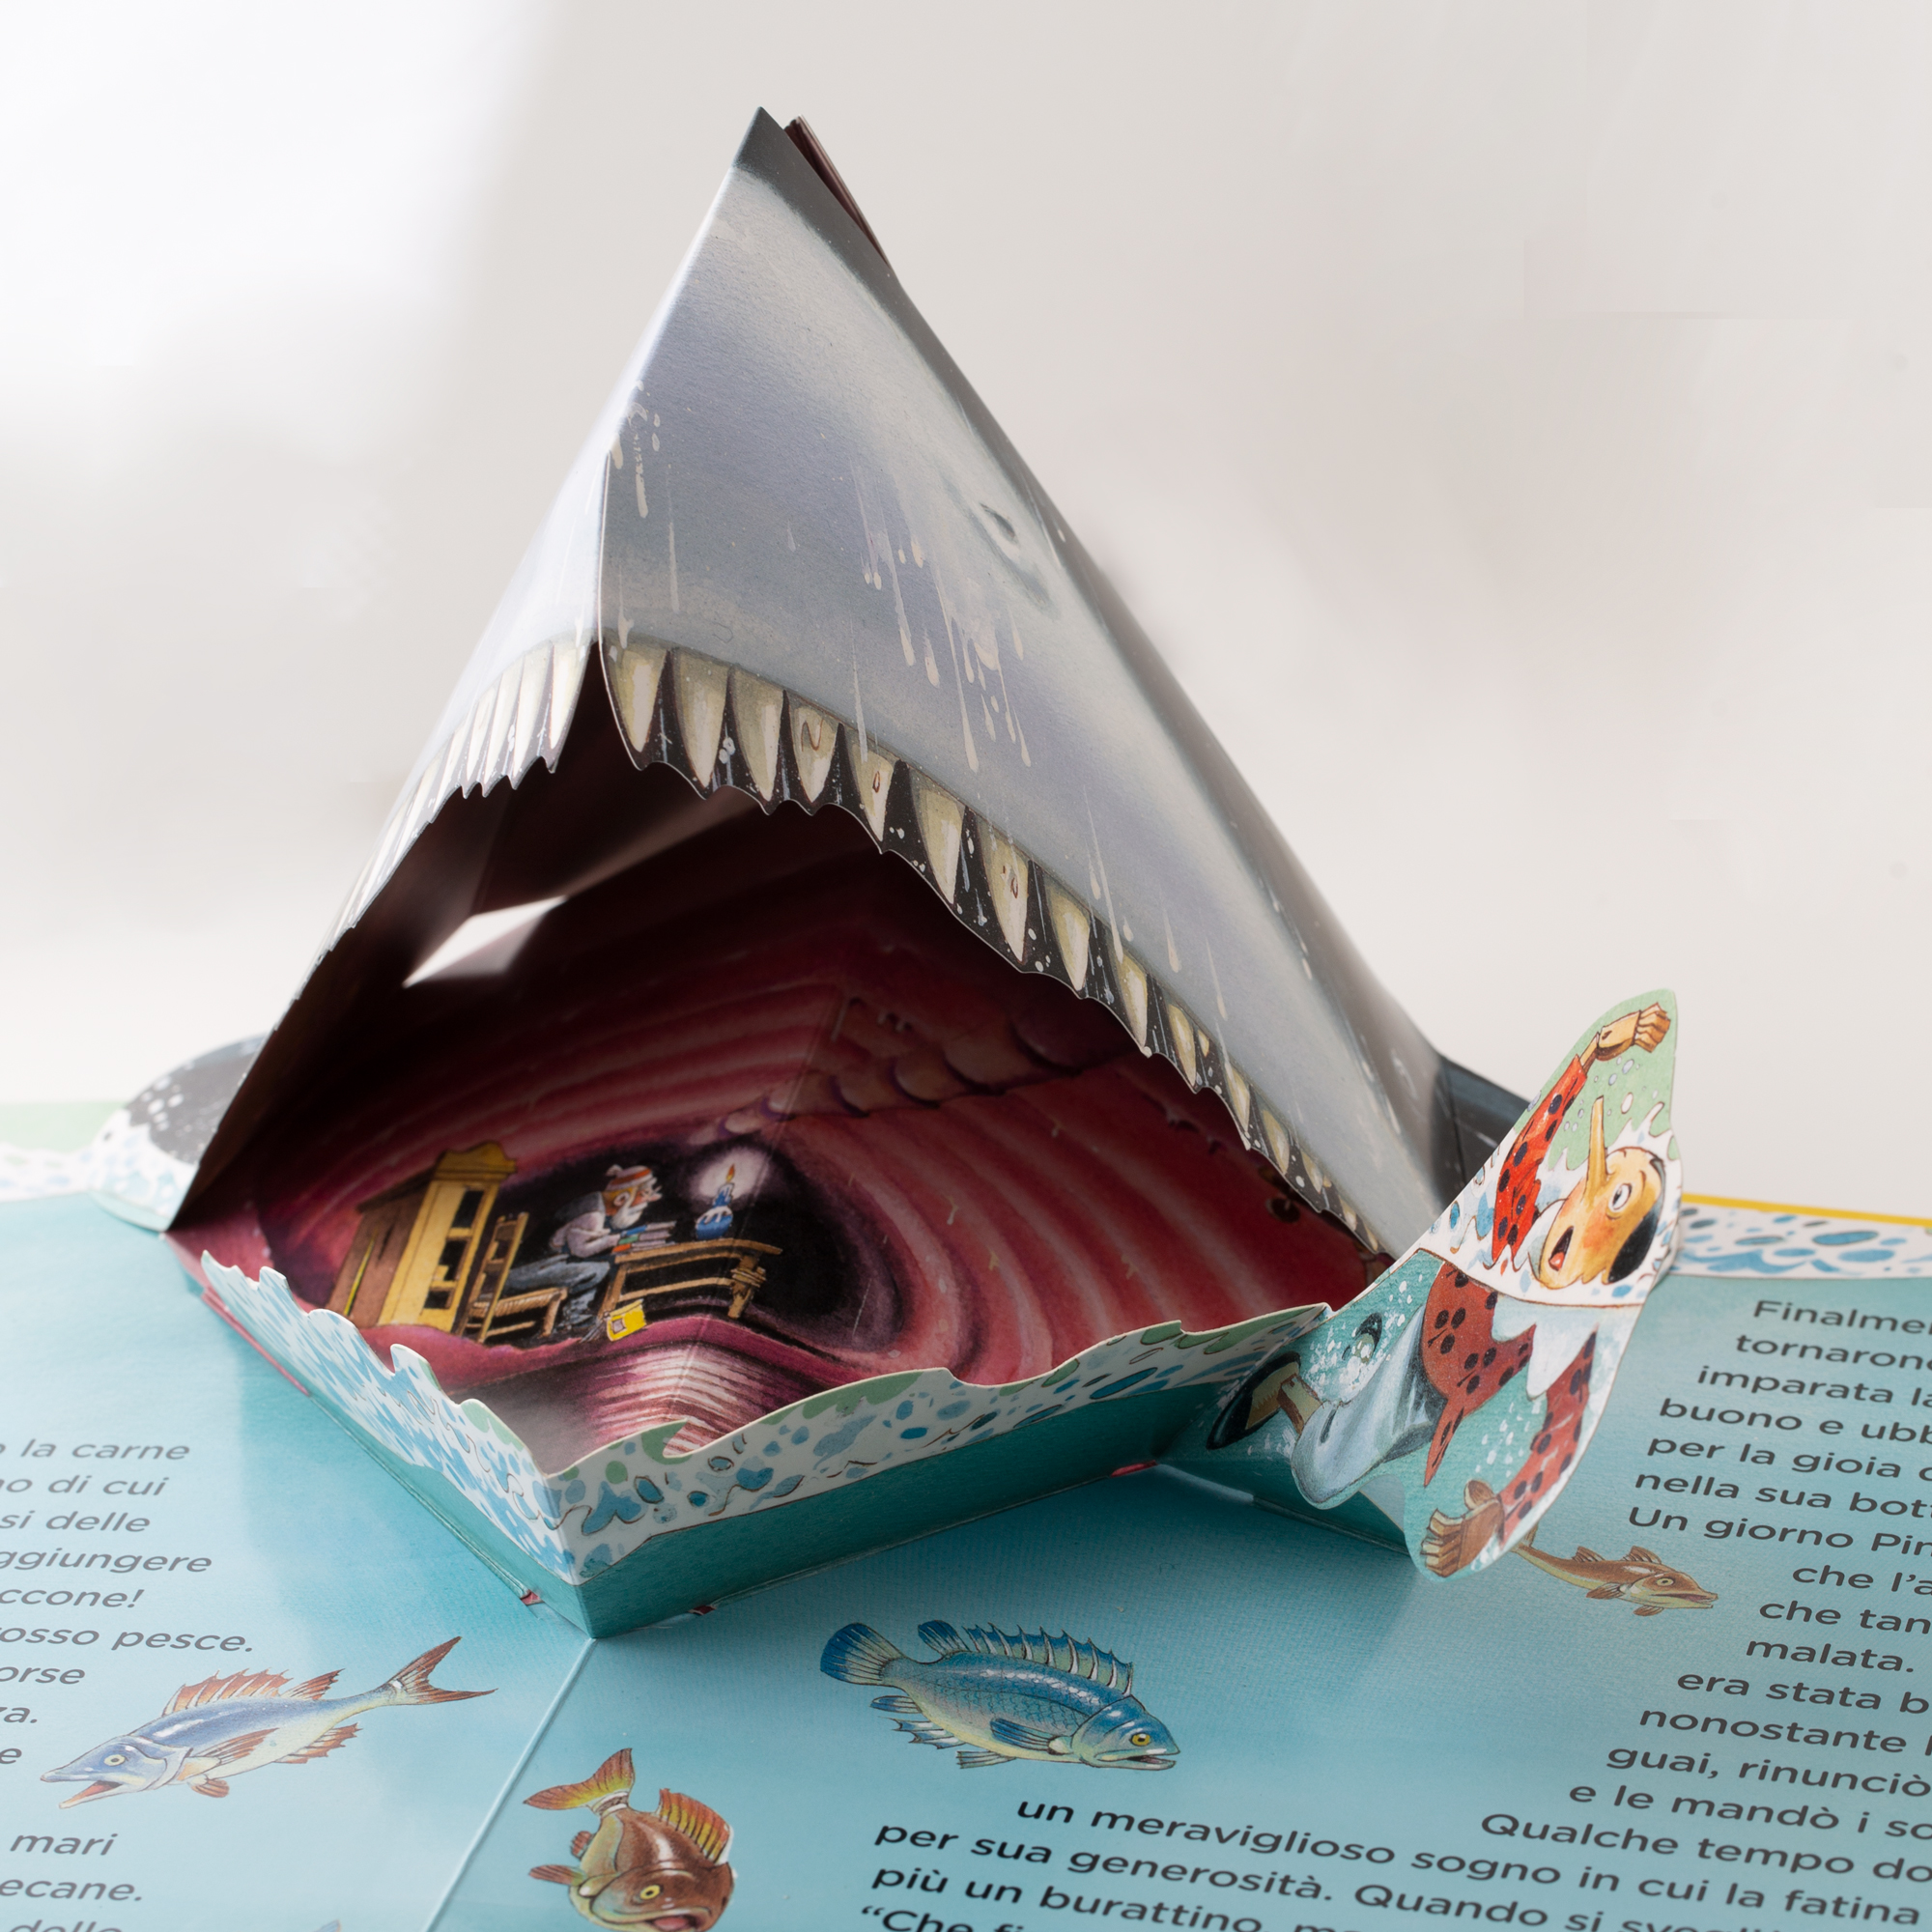 Pop-up storybook of Pinocchio - The tale of Pinocchio in three-dimensional  pages